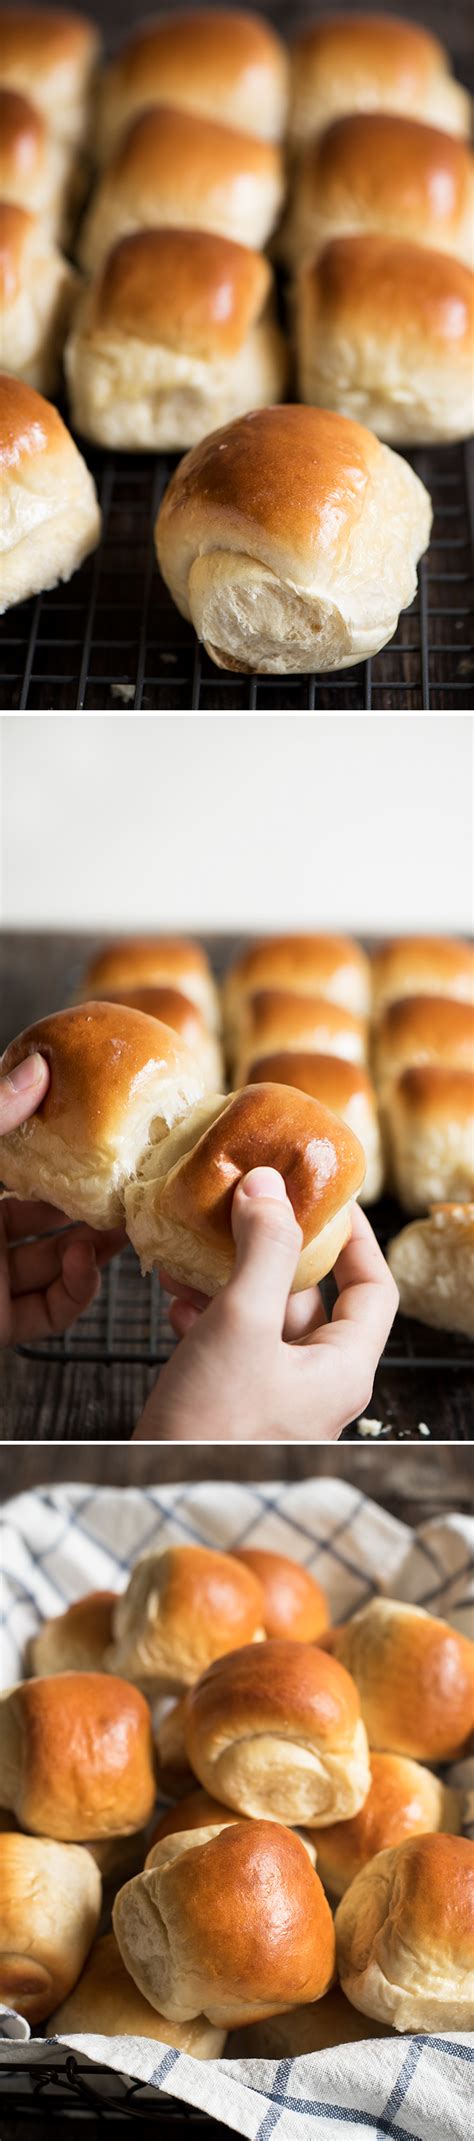 The roux is mixed into the final dough, producing wonderfully tender bread each and every time. Hokkaido Milk Rolls | Recipe | Dinner rolls, Recipes ...